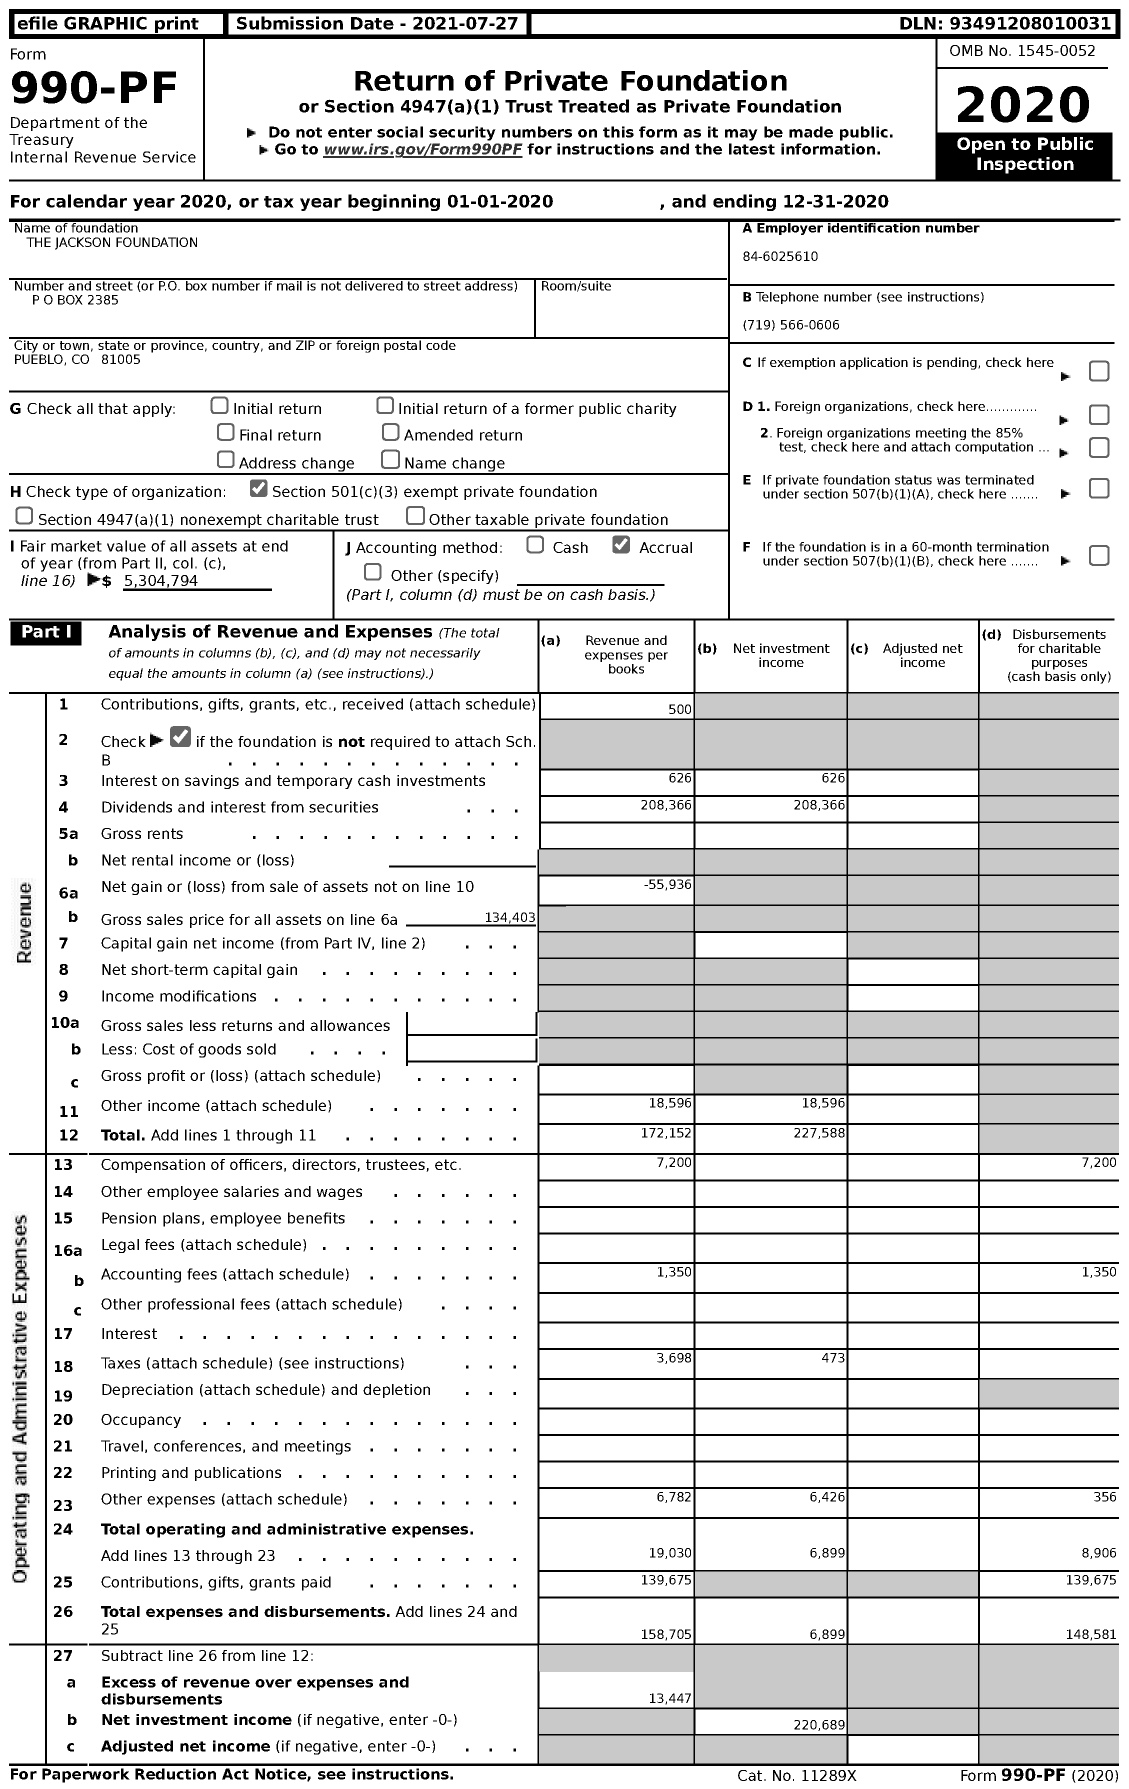 Image of first page of 2020 Form 990PF for The Jackson Foundation